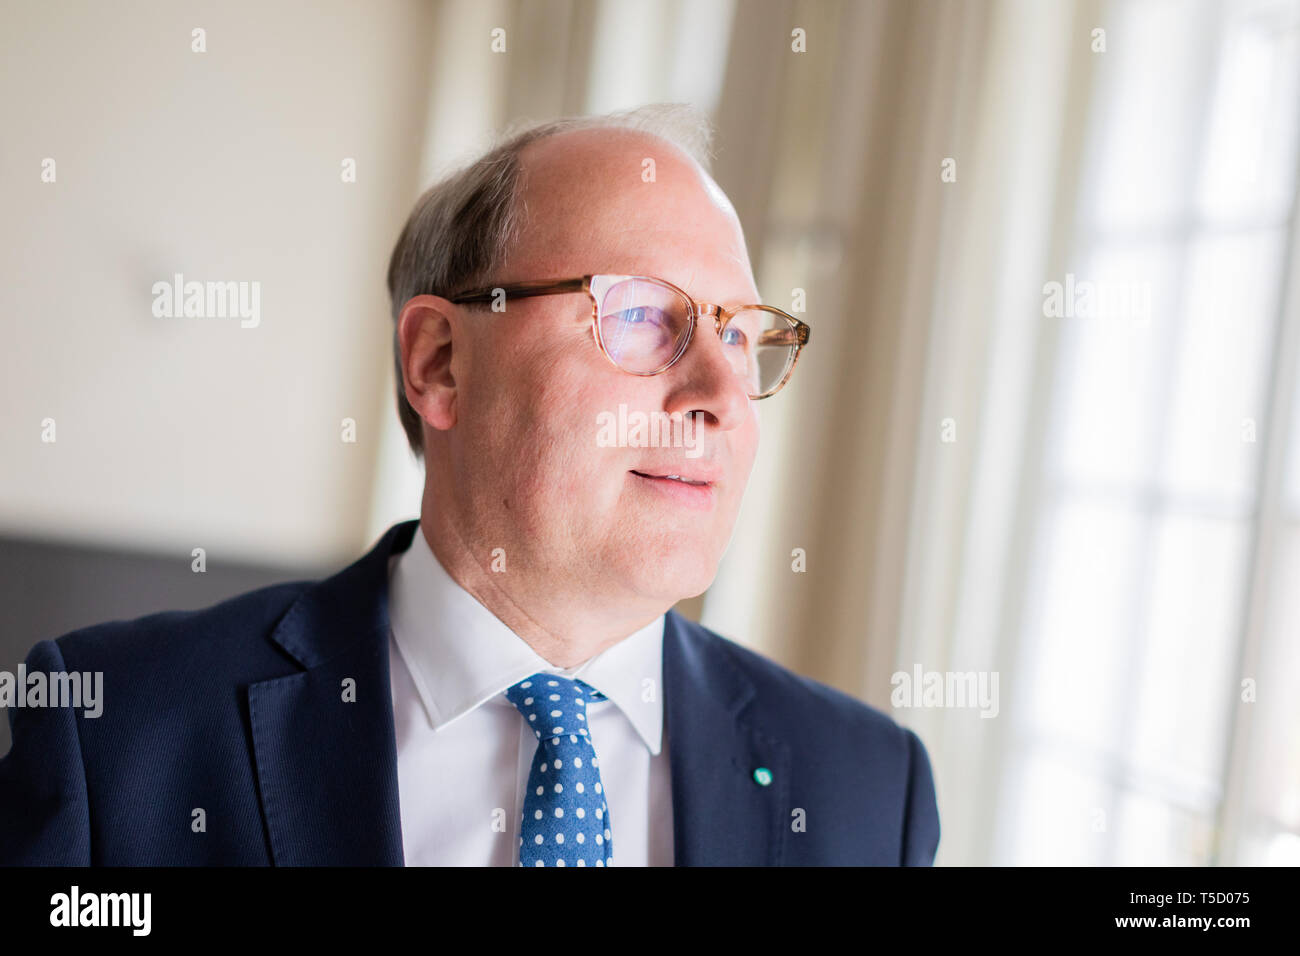 24 April 2019, North Rhine-Westphalia, Düsseldorf: Stefan Genth, Managing Director of the Handelsverband Deutschland (HDE), admitted to the Industrieclub. Here he provided information about the start of the retail trade in 2019 and the expectations of the industry for the year as a whole. Photo: Rolf Vennenbernd/dpa Stock Photo